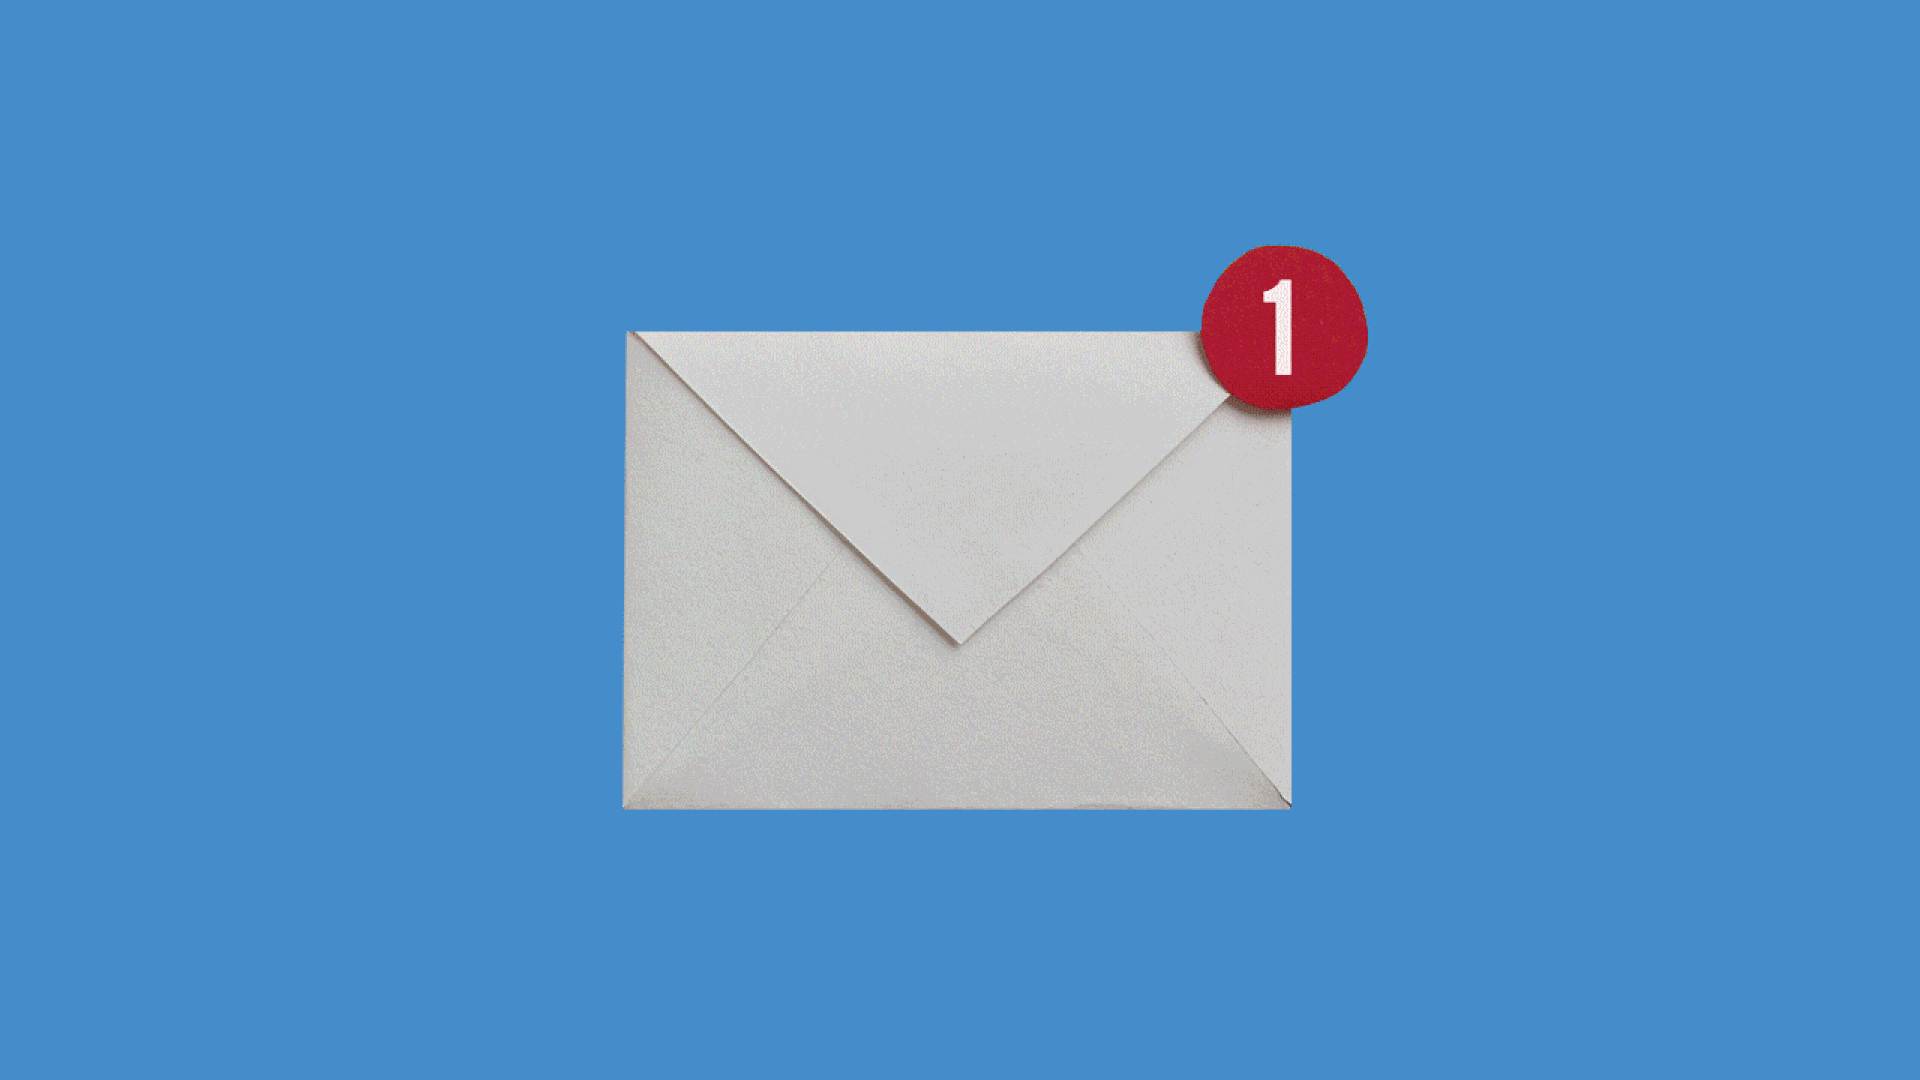 An animation of a mail icon with an error alert morphing into a "1" badge